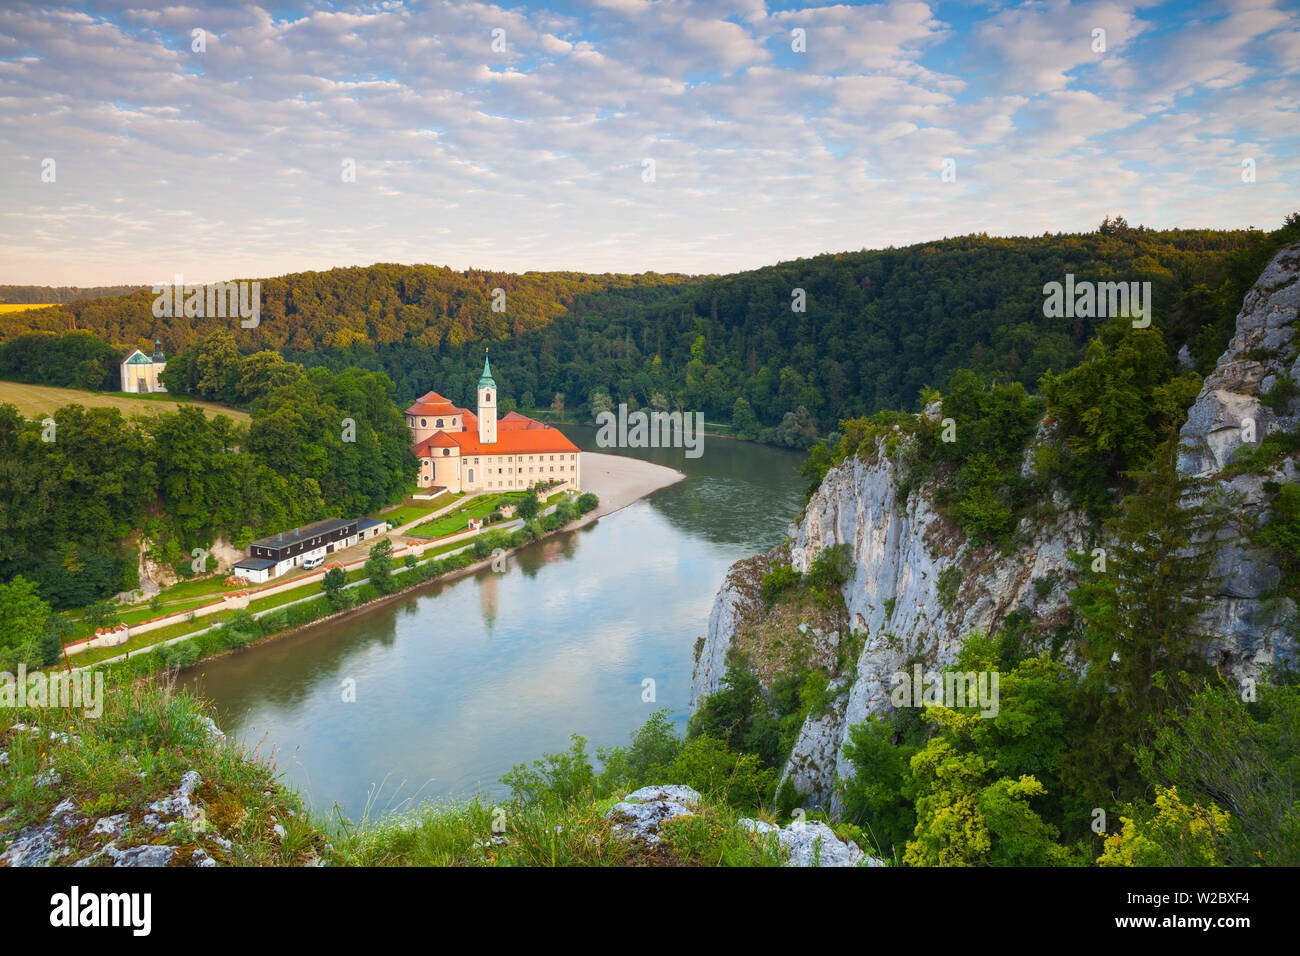 Elevated view over Weltenburg Abbey & The River Danube, Lower Bavaria, Bavaria, Germany Stock Photo